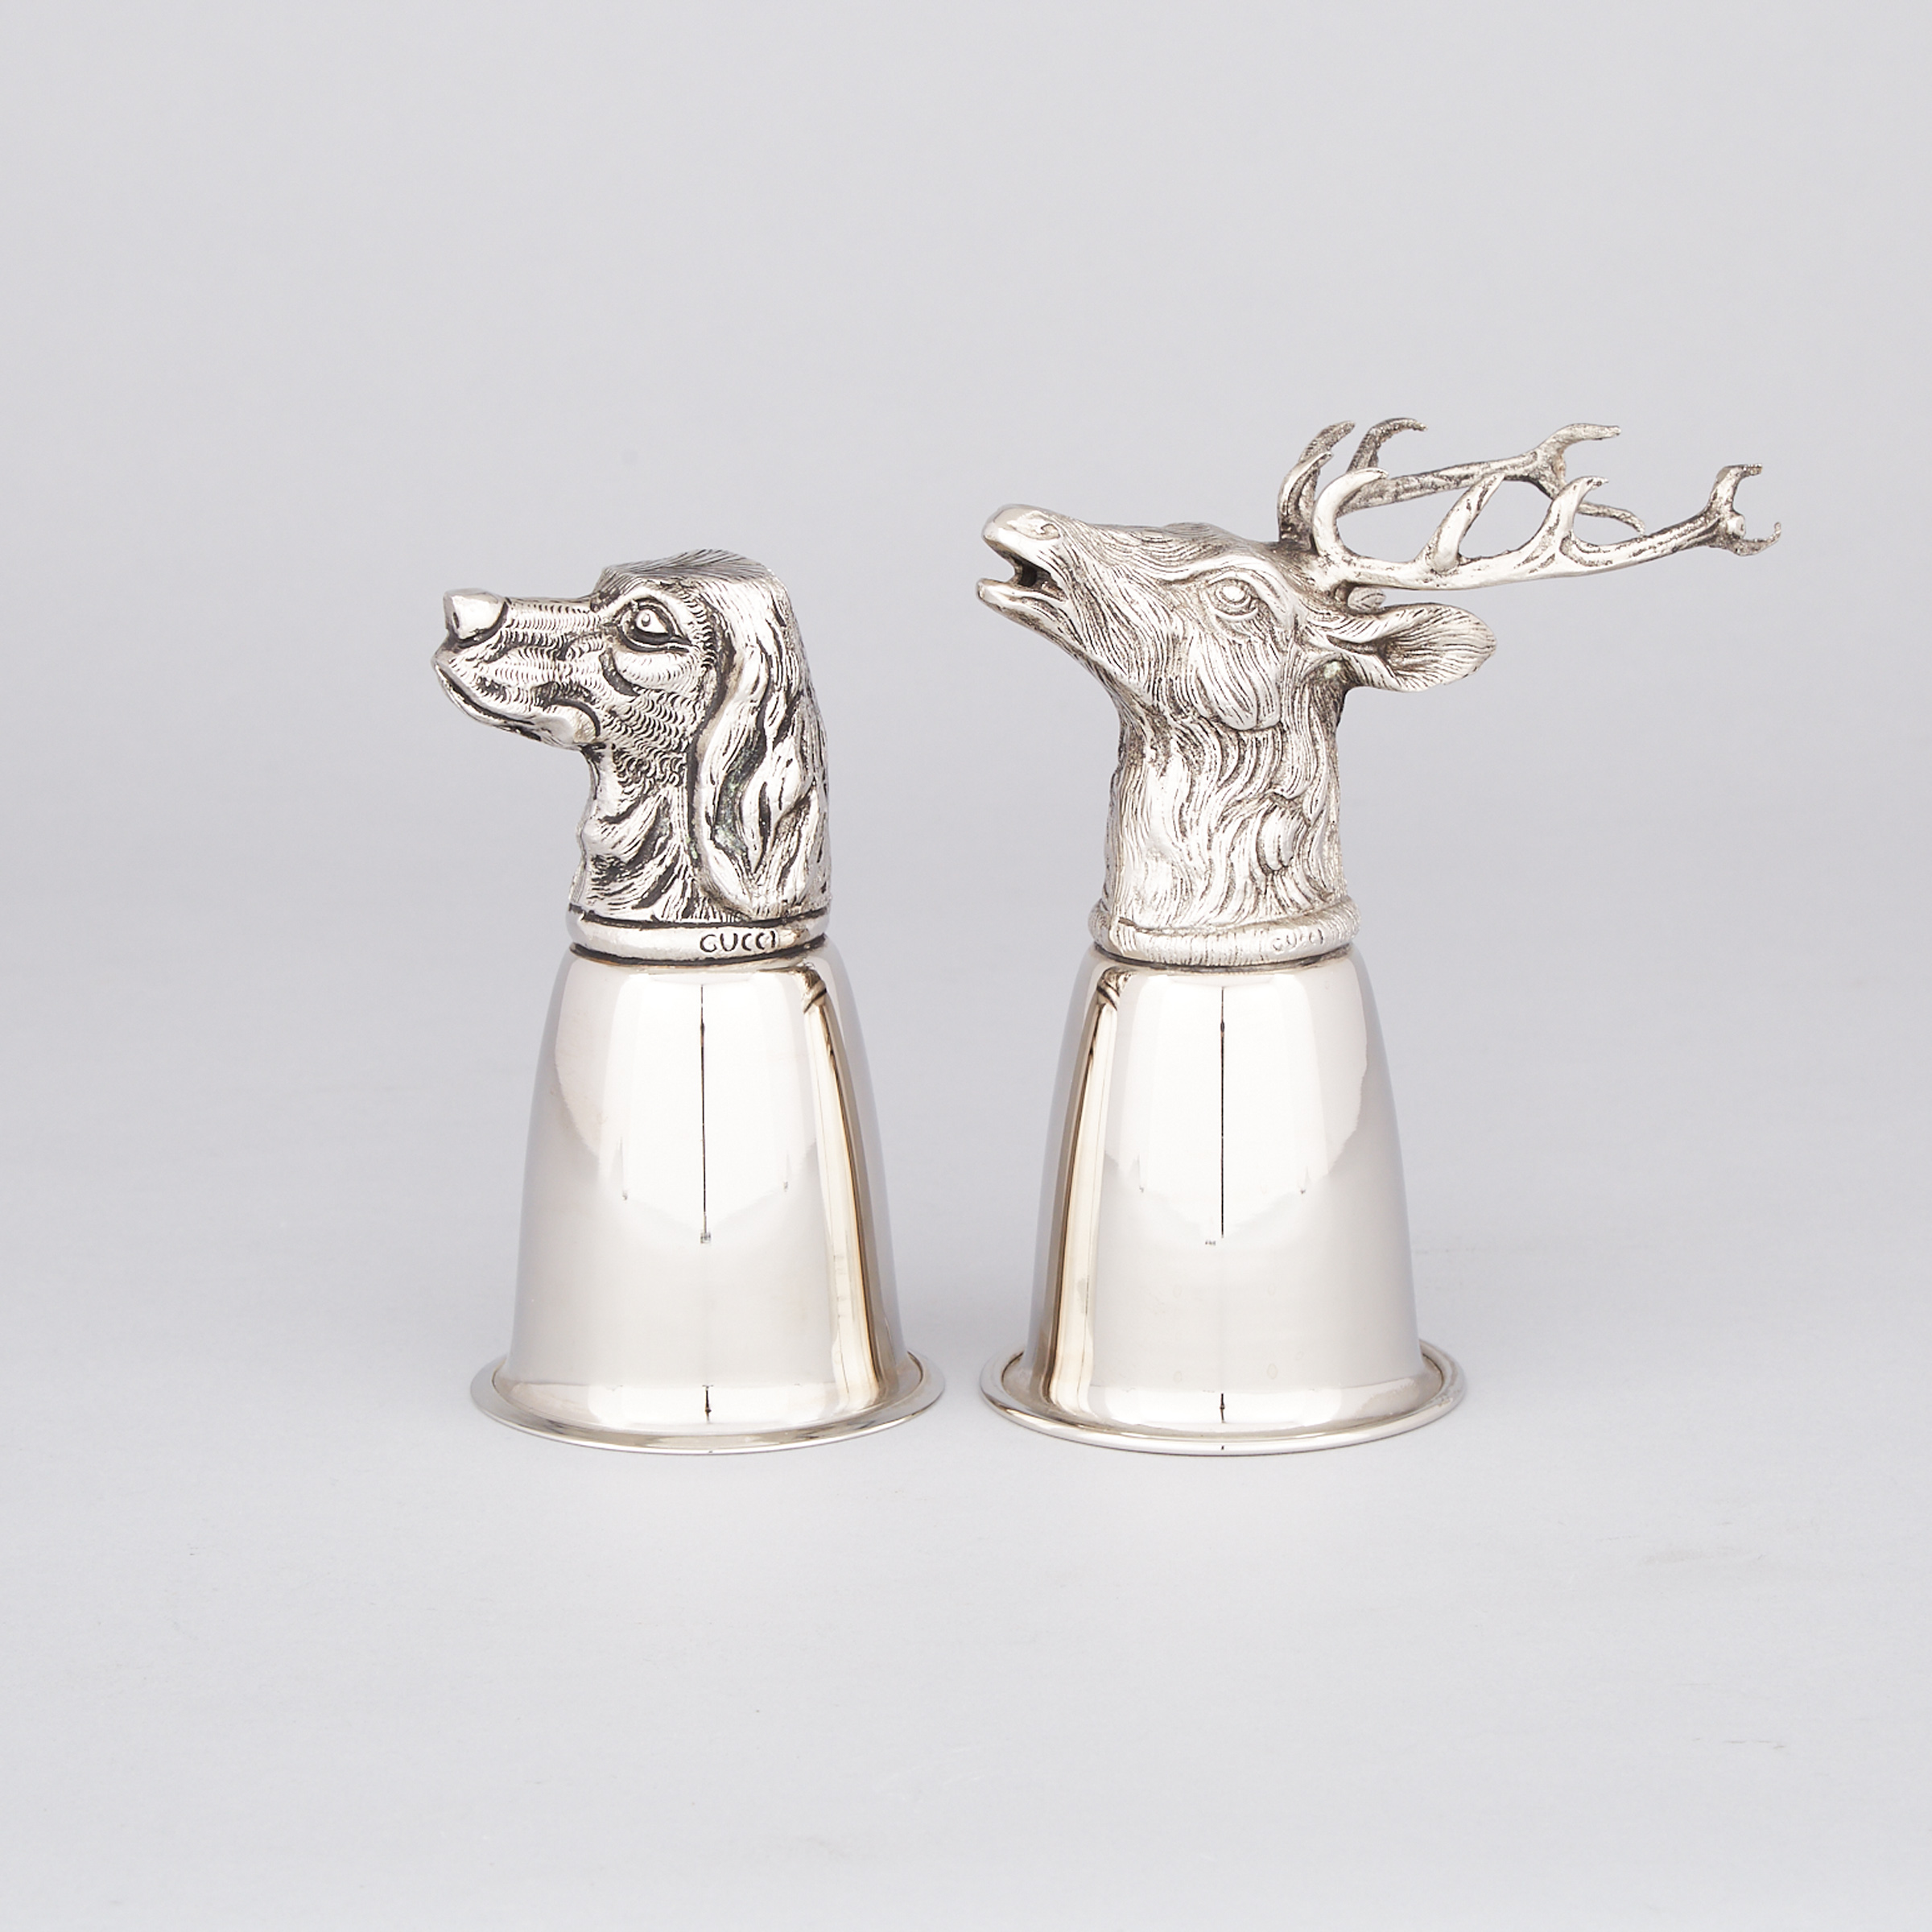 Pair of Gucci Silver Plated Stirrup Cups, 20th century